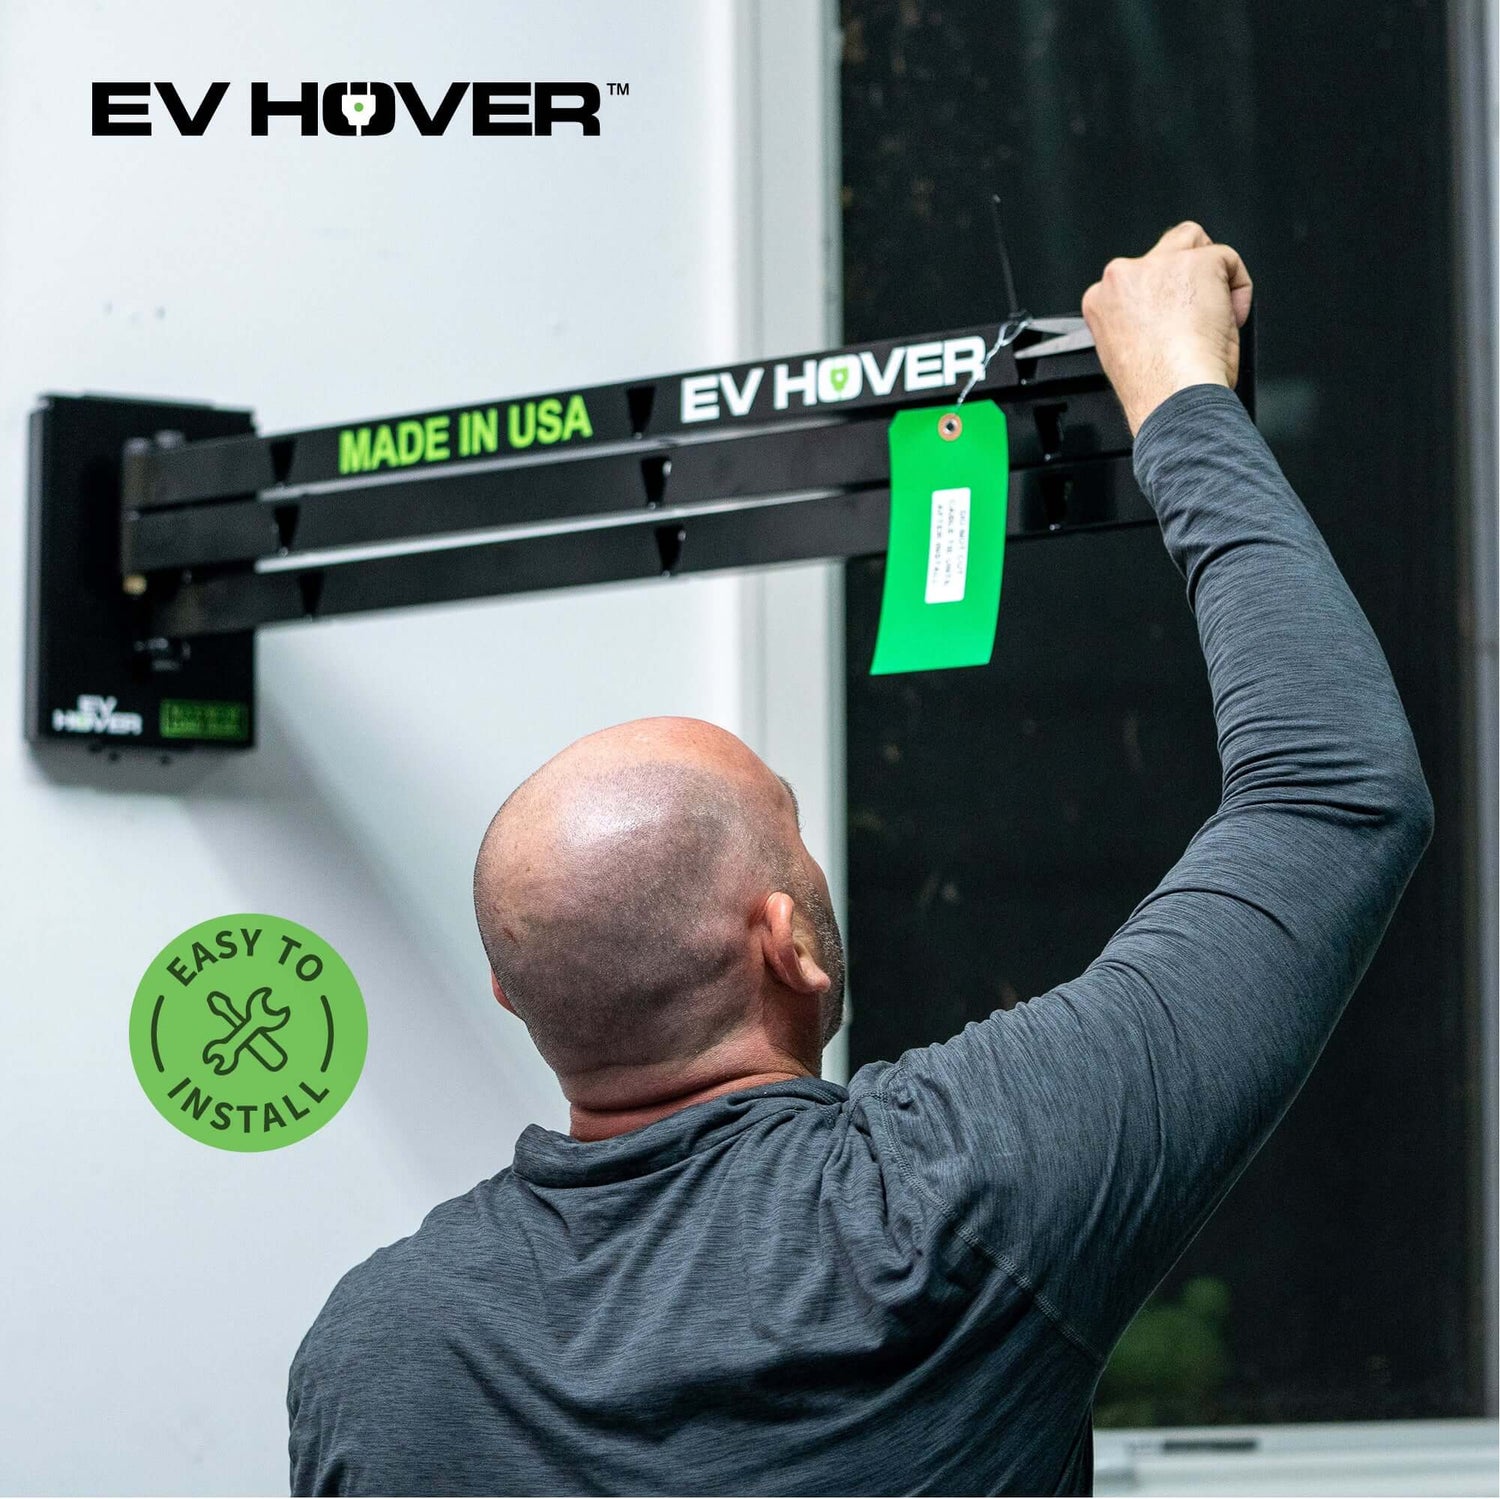 EV Hover is really easy to install